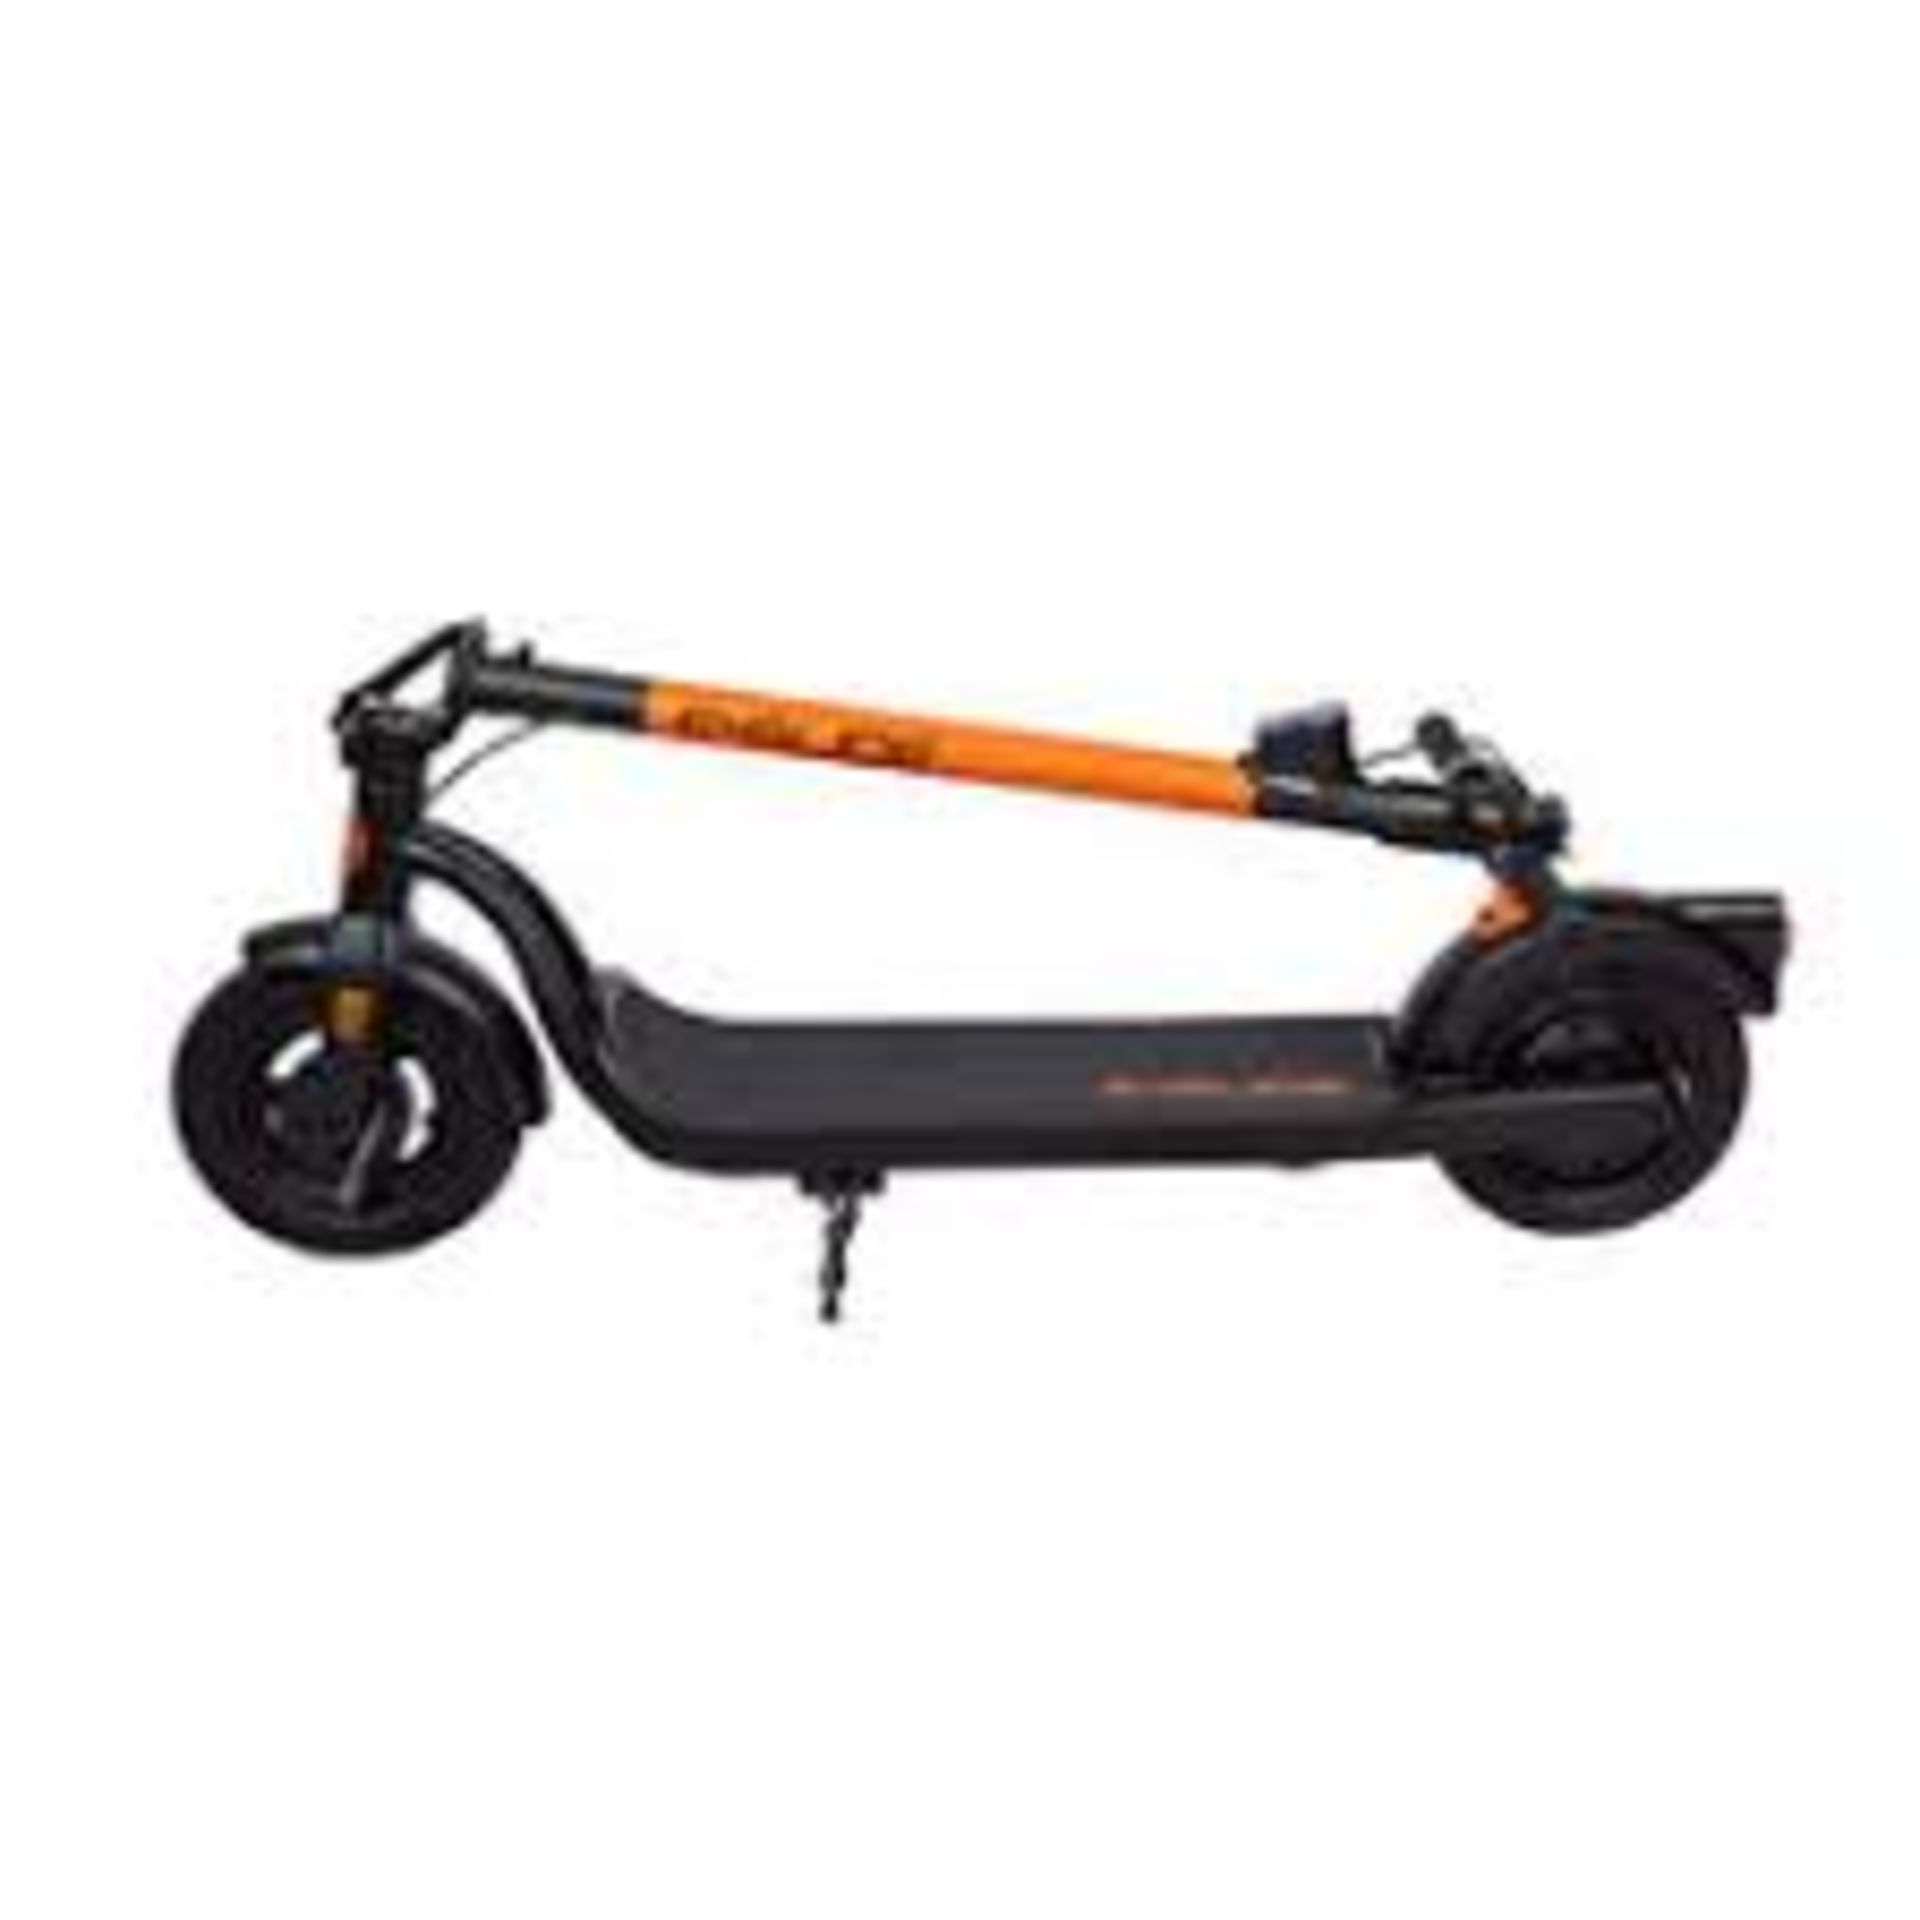 Trade Lot 4 x Brand New E-Glide V2 Electric Scooter Orange and Black RRP £599, Introducing a sleek - Image 2 of 2